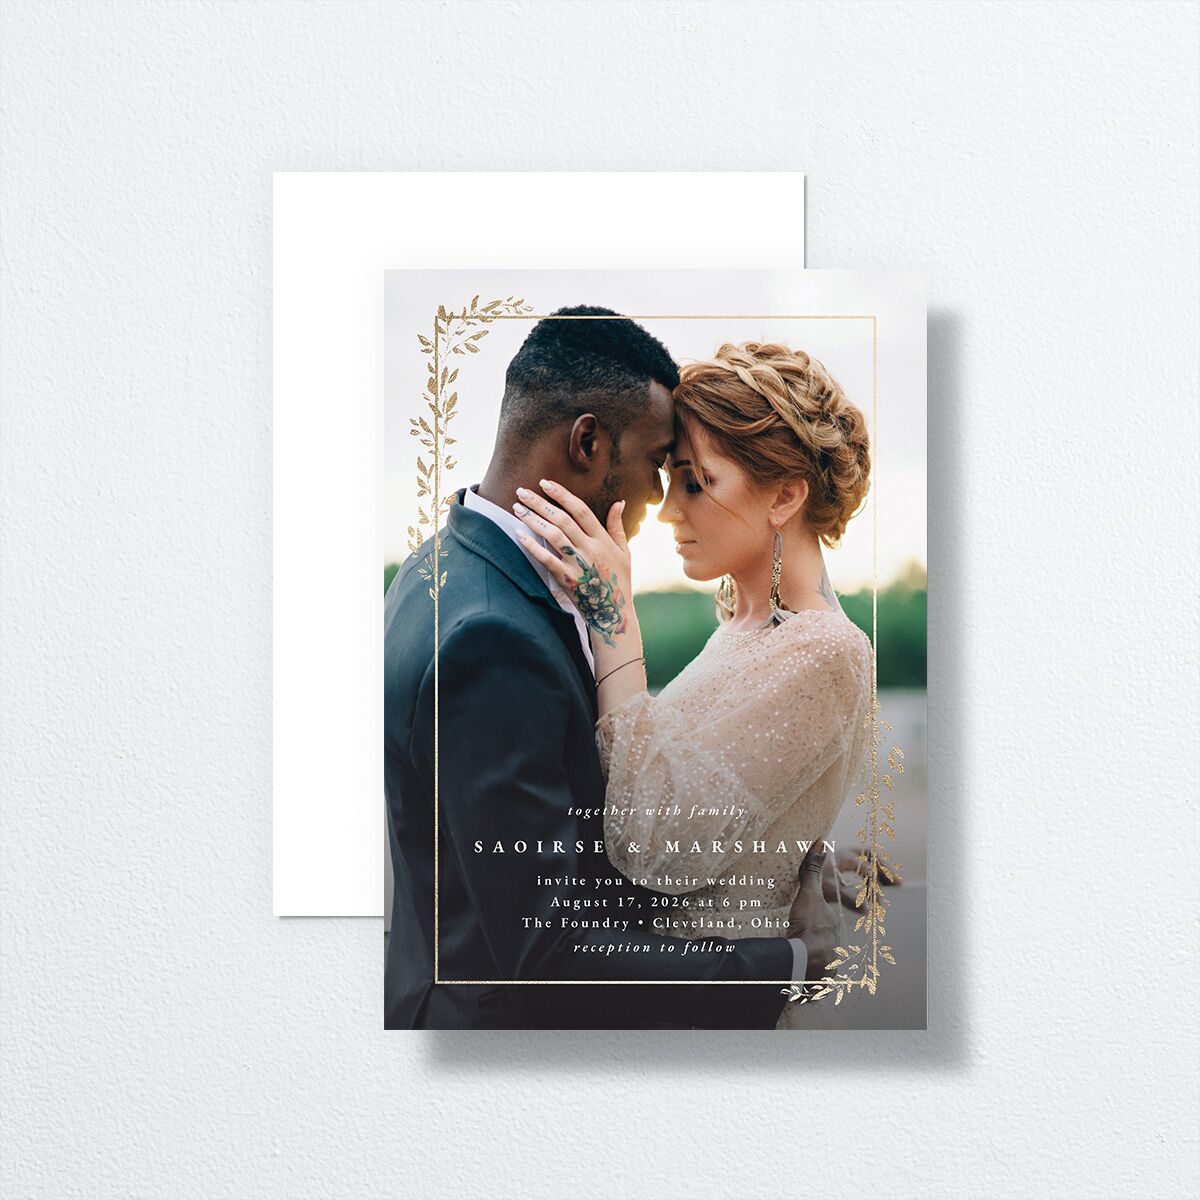 Delicate Frame Wedding Invitations front-and-back